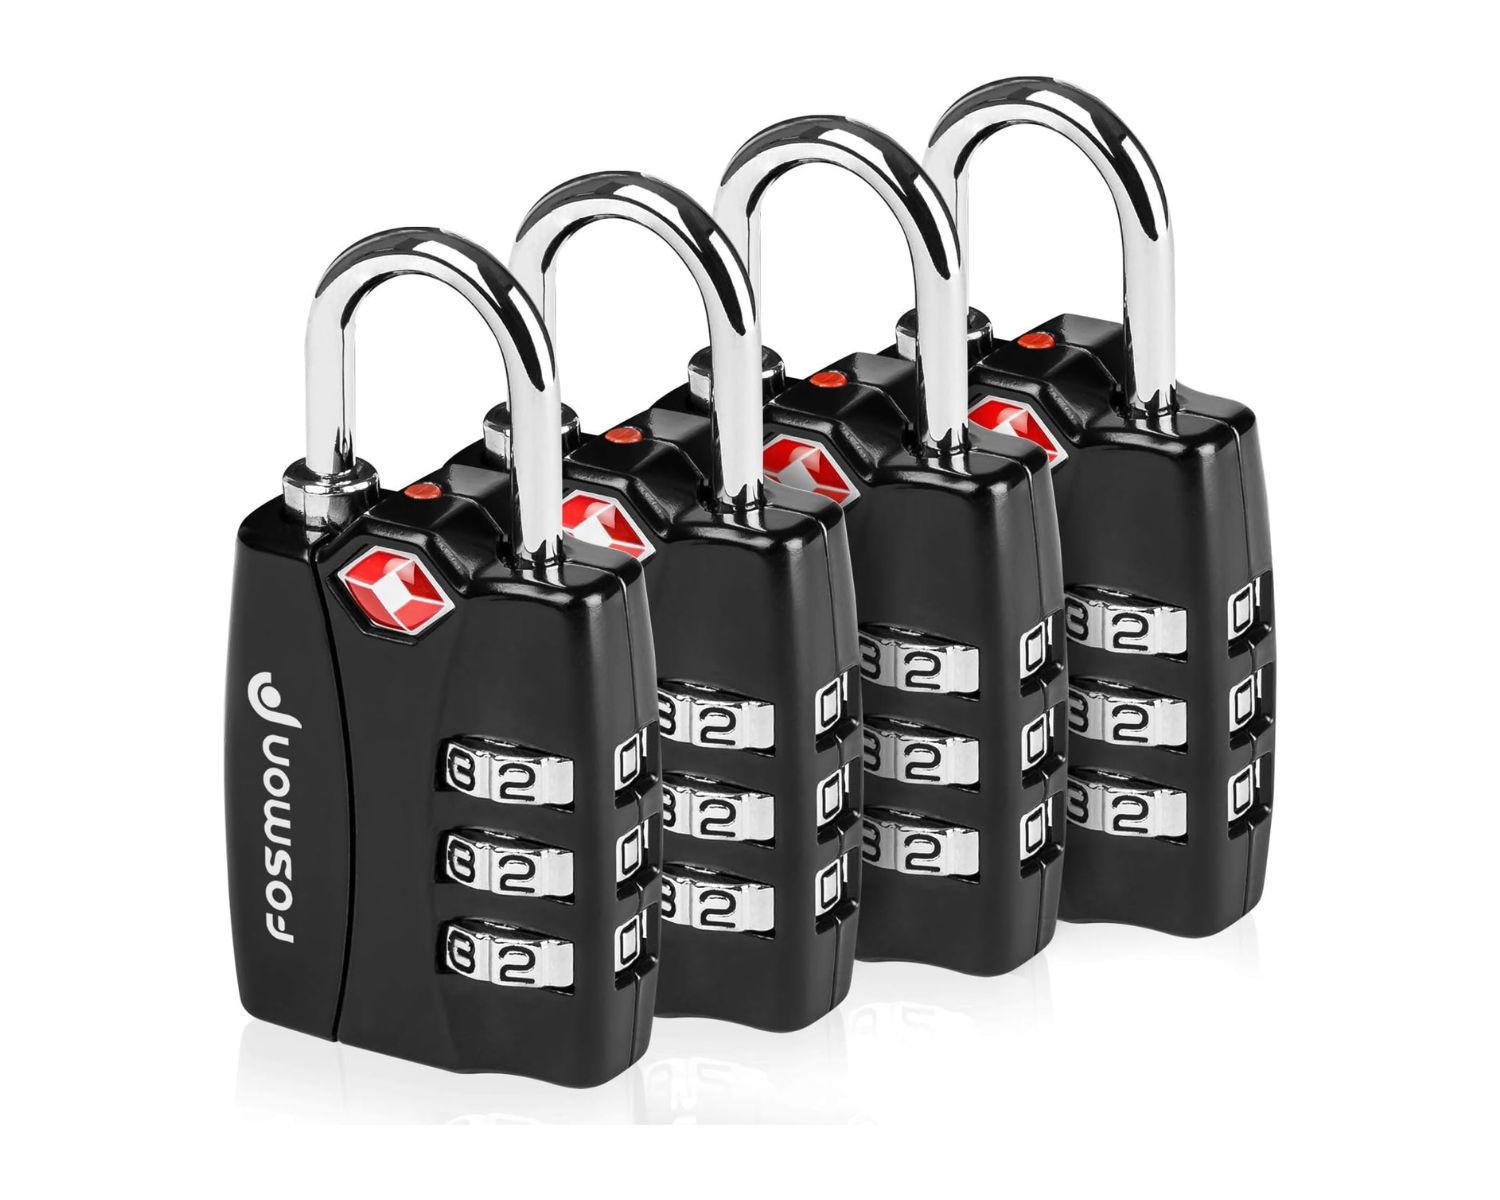 TSA-Approved Luggage Lock Review